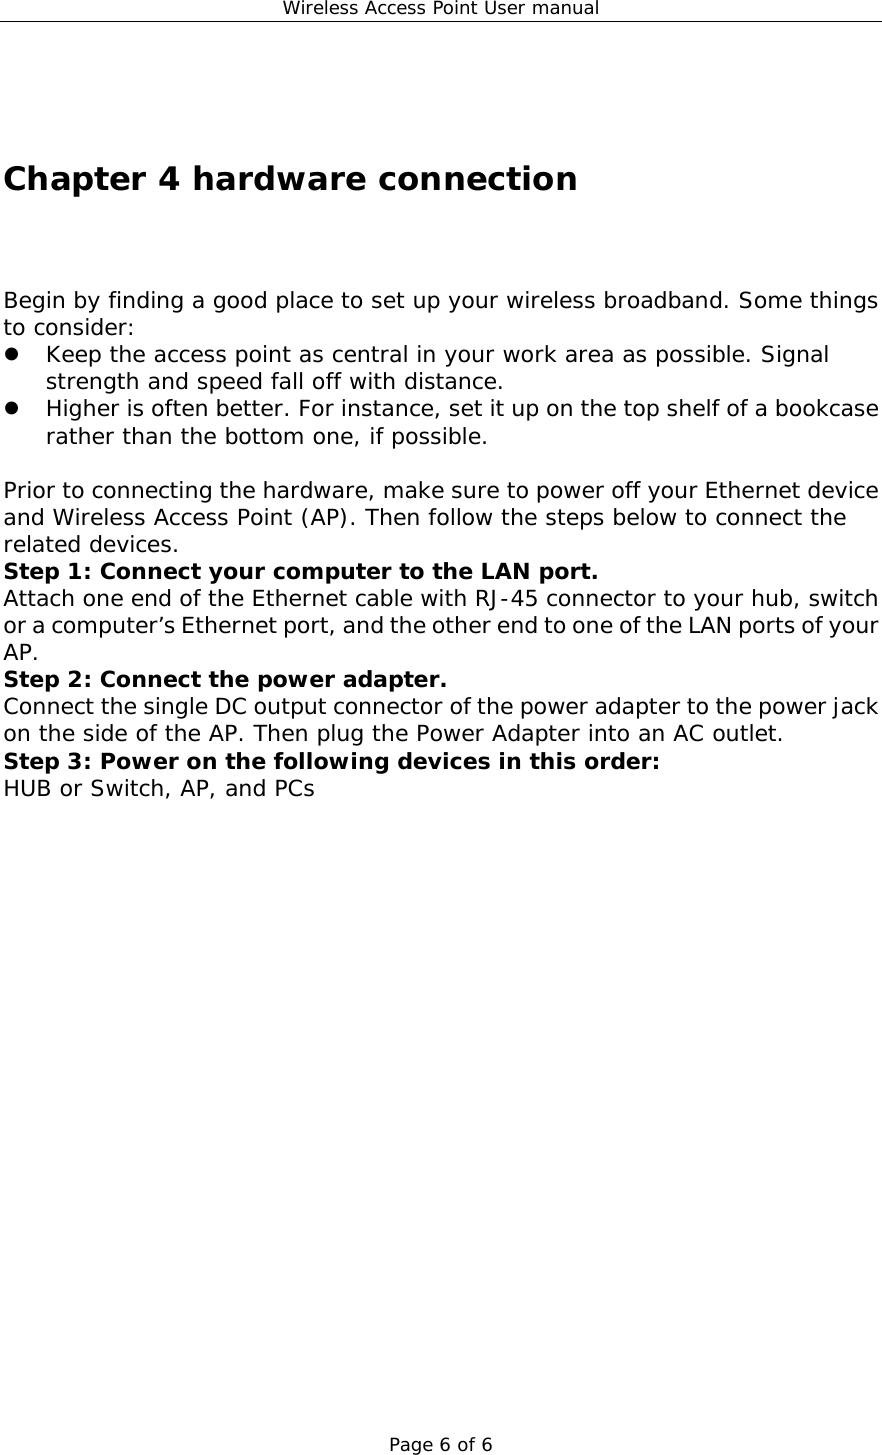 Wireless Access Point User manual Page 6 of 6   Chapter 4 hardware connection Begin by finding a good place to set up your wireless broadband. Some things to consider:ٛ    Keep the access point as central in your work area as possible. Signal strength and speed fall off with distance.    Higher is often better. For instance, set it up on the top shelf of a bookcase rather than the bottom one, if possible.  Prior to connecting the hardware, make sure to power off your Ethernet device and Wireless Access Point (AP). Then follow the steps below to connect the related devices. Step 1: Connect your computer to the LAN port. Attach one end of the Ethernet cable with RJ-45 connector to your hub, switch or a computer’s Ethernet port, and the other end to one of the LAN ports of your AP. Step 2: Connect the power adapter. Connect the single DC output connector of the power adapter to the power jack on the side of the AP. Then plug the Power Adapter into an AC outlet. Step 3: Power on the following devices in this order: HUB or Switch, AP, and PCs                  